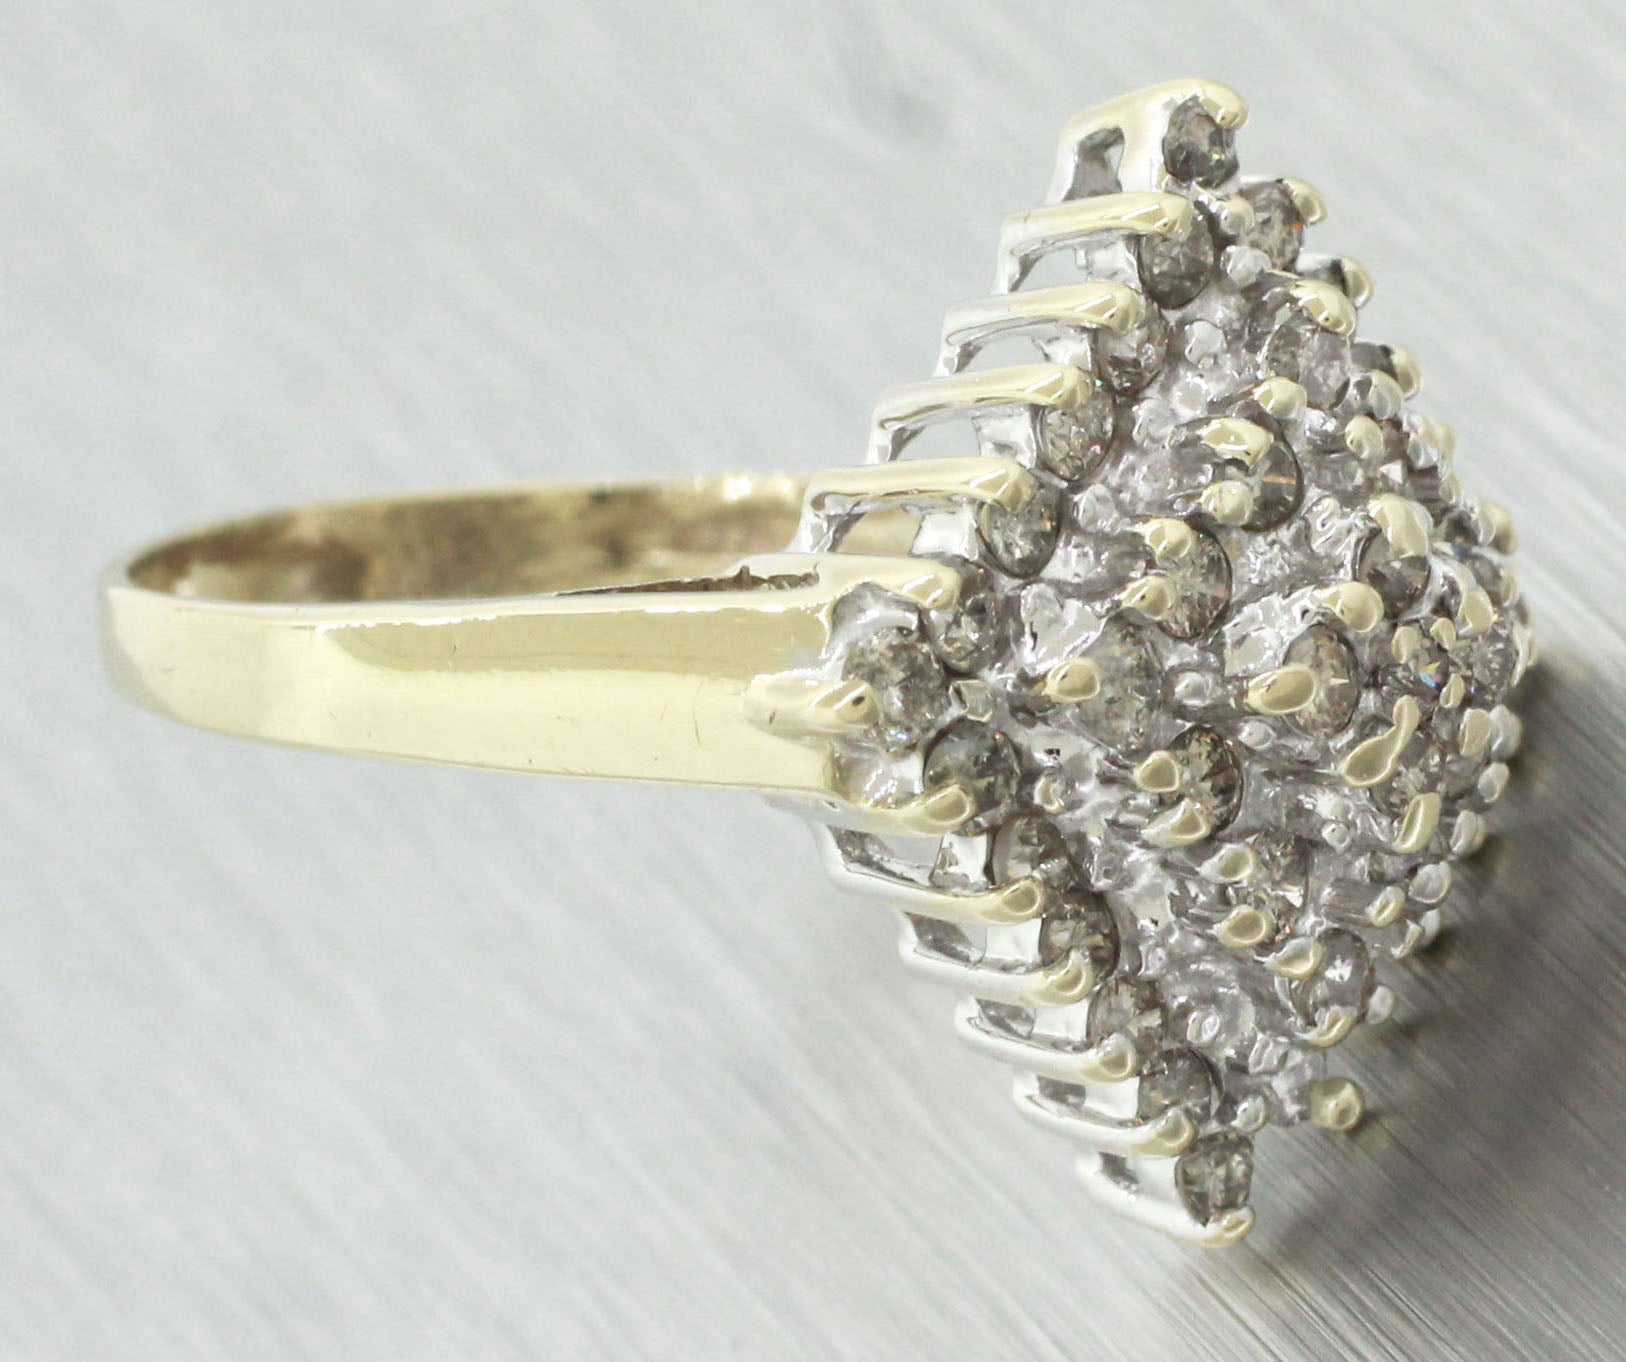 Vintage Estate 10k Solid Yellow & White Gold 0.40ctw Diamond Cluster Ring